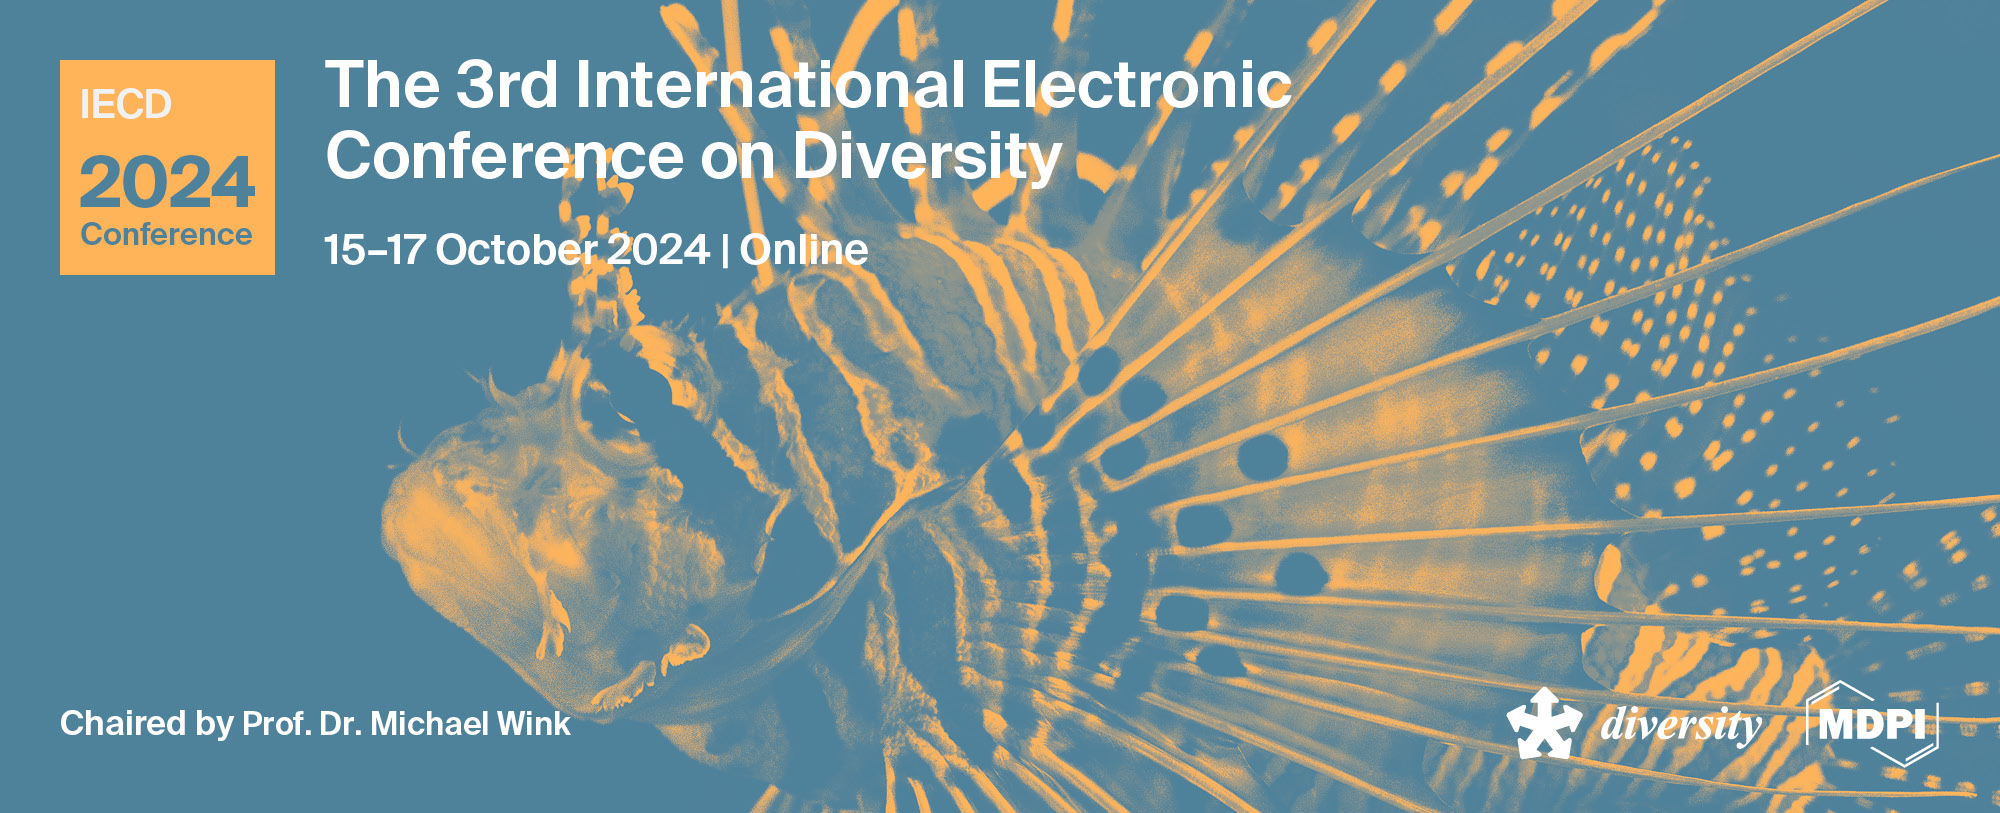 The 3rd International Electronic Conference on Diversity